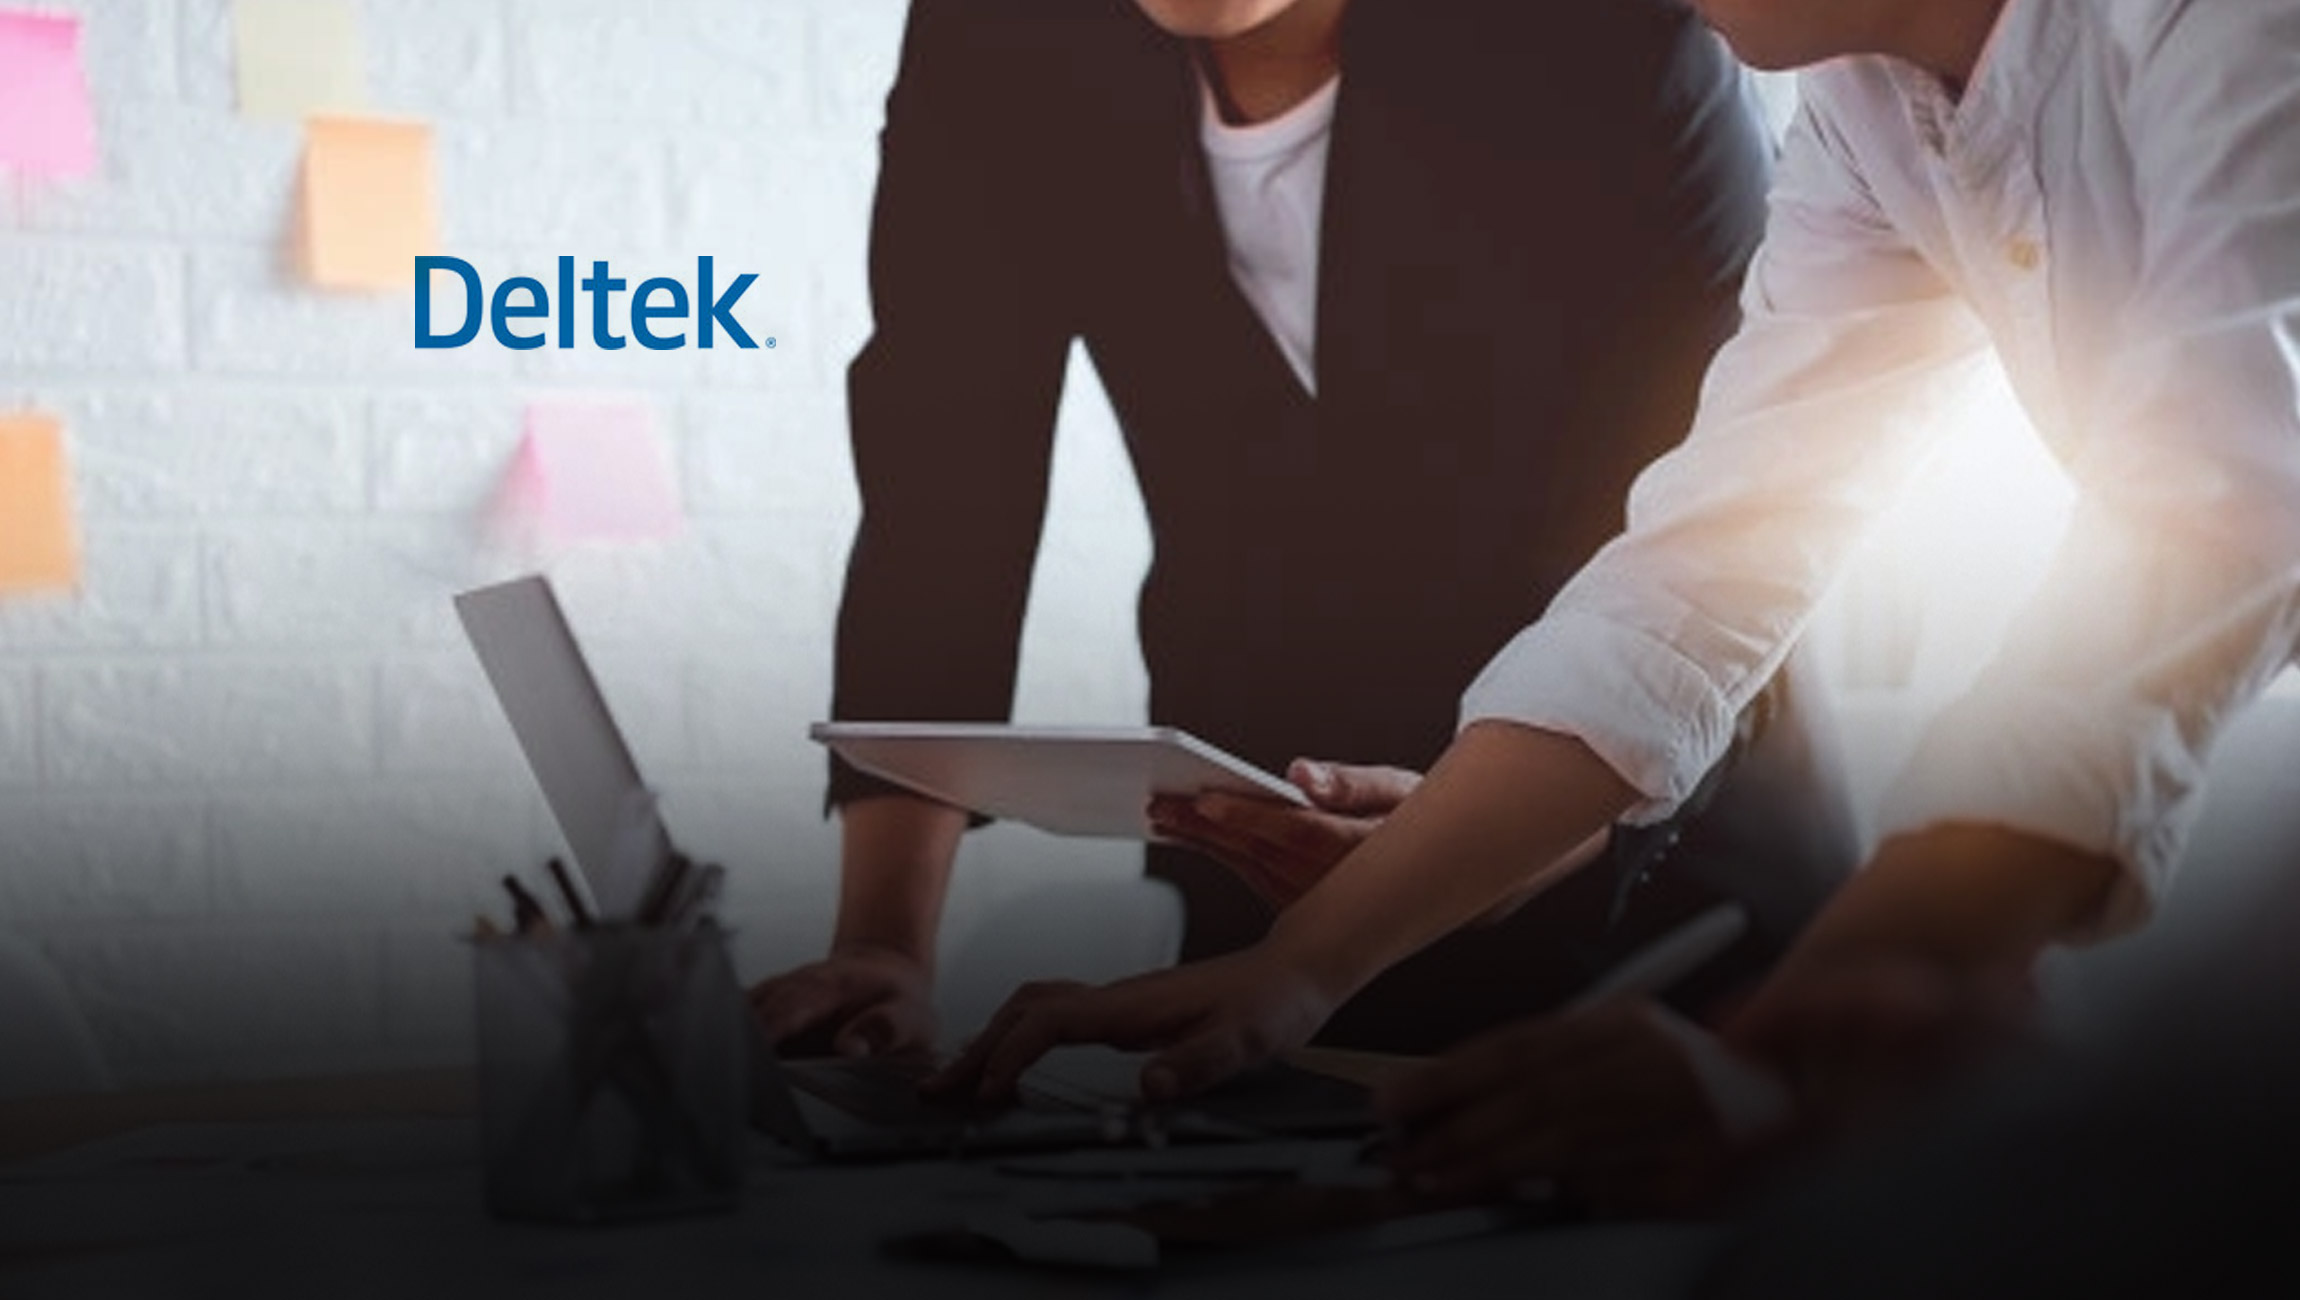 New Research from G2 Highlights Deltek's Continued Project-Based ERP Leadership with Deltek Vantagepoint